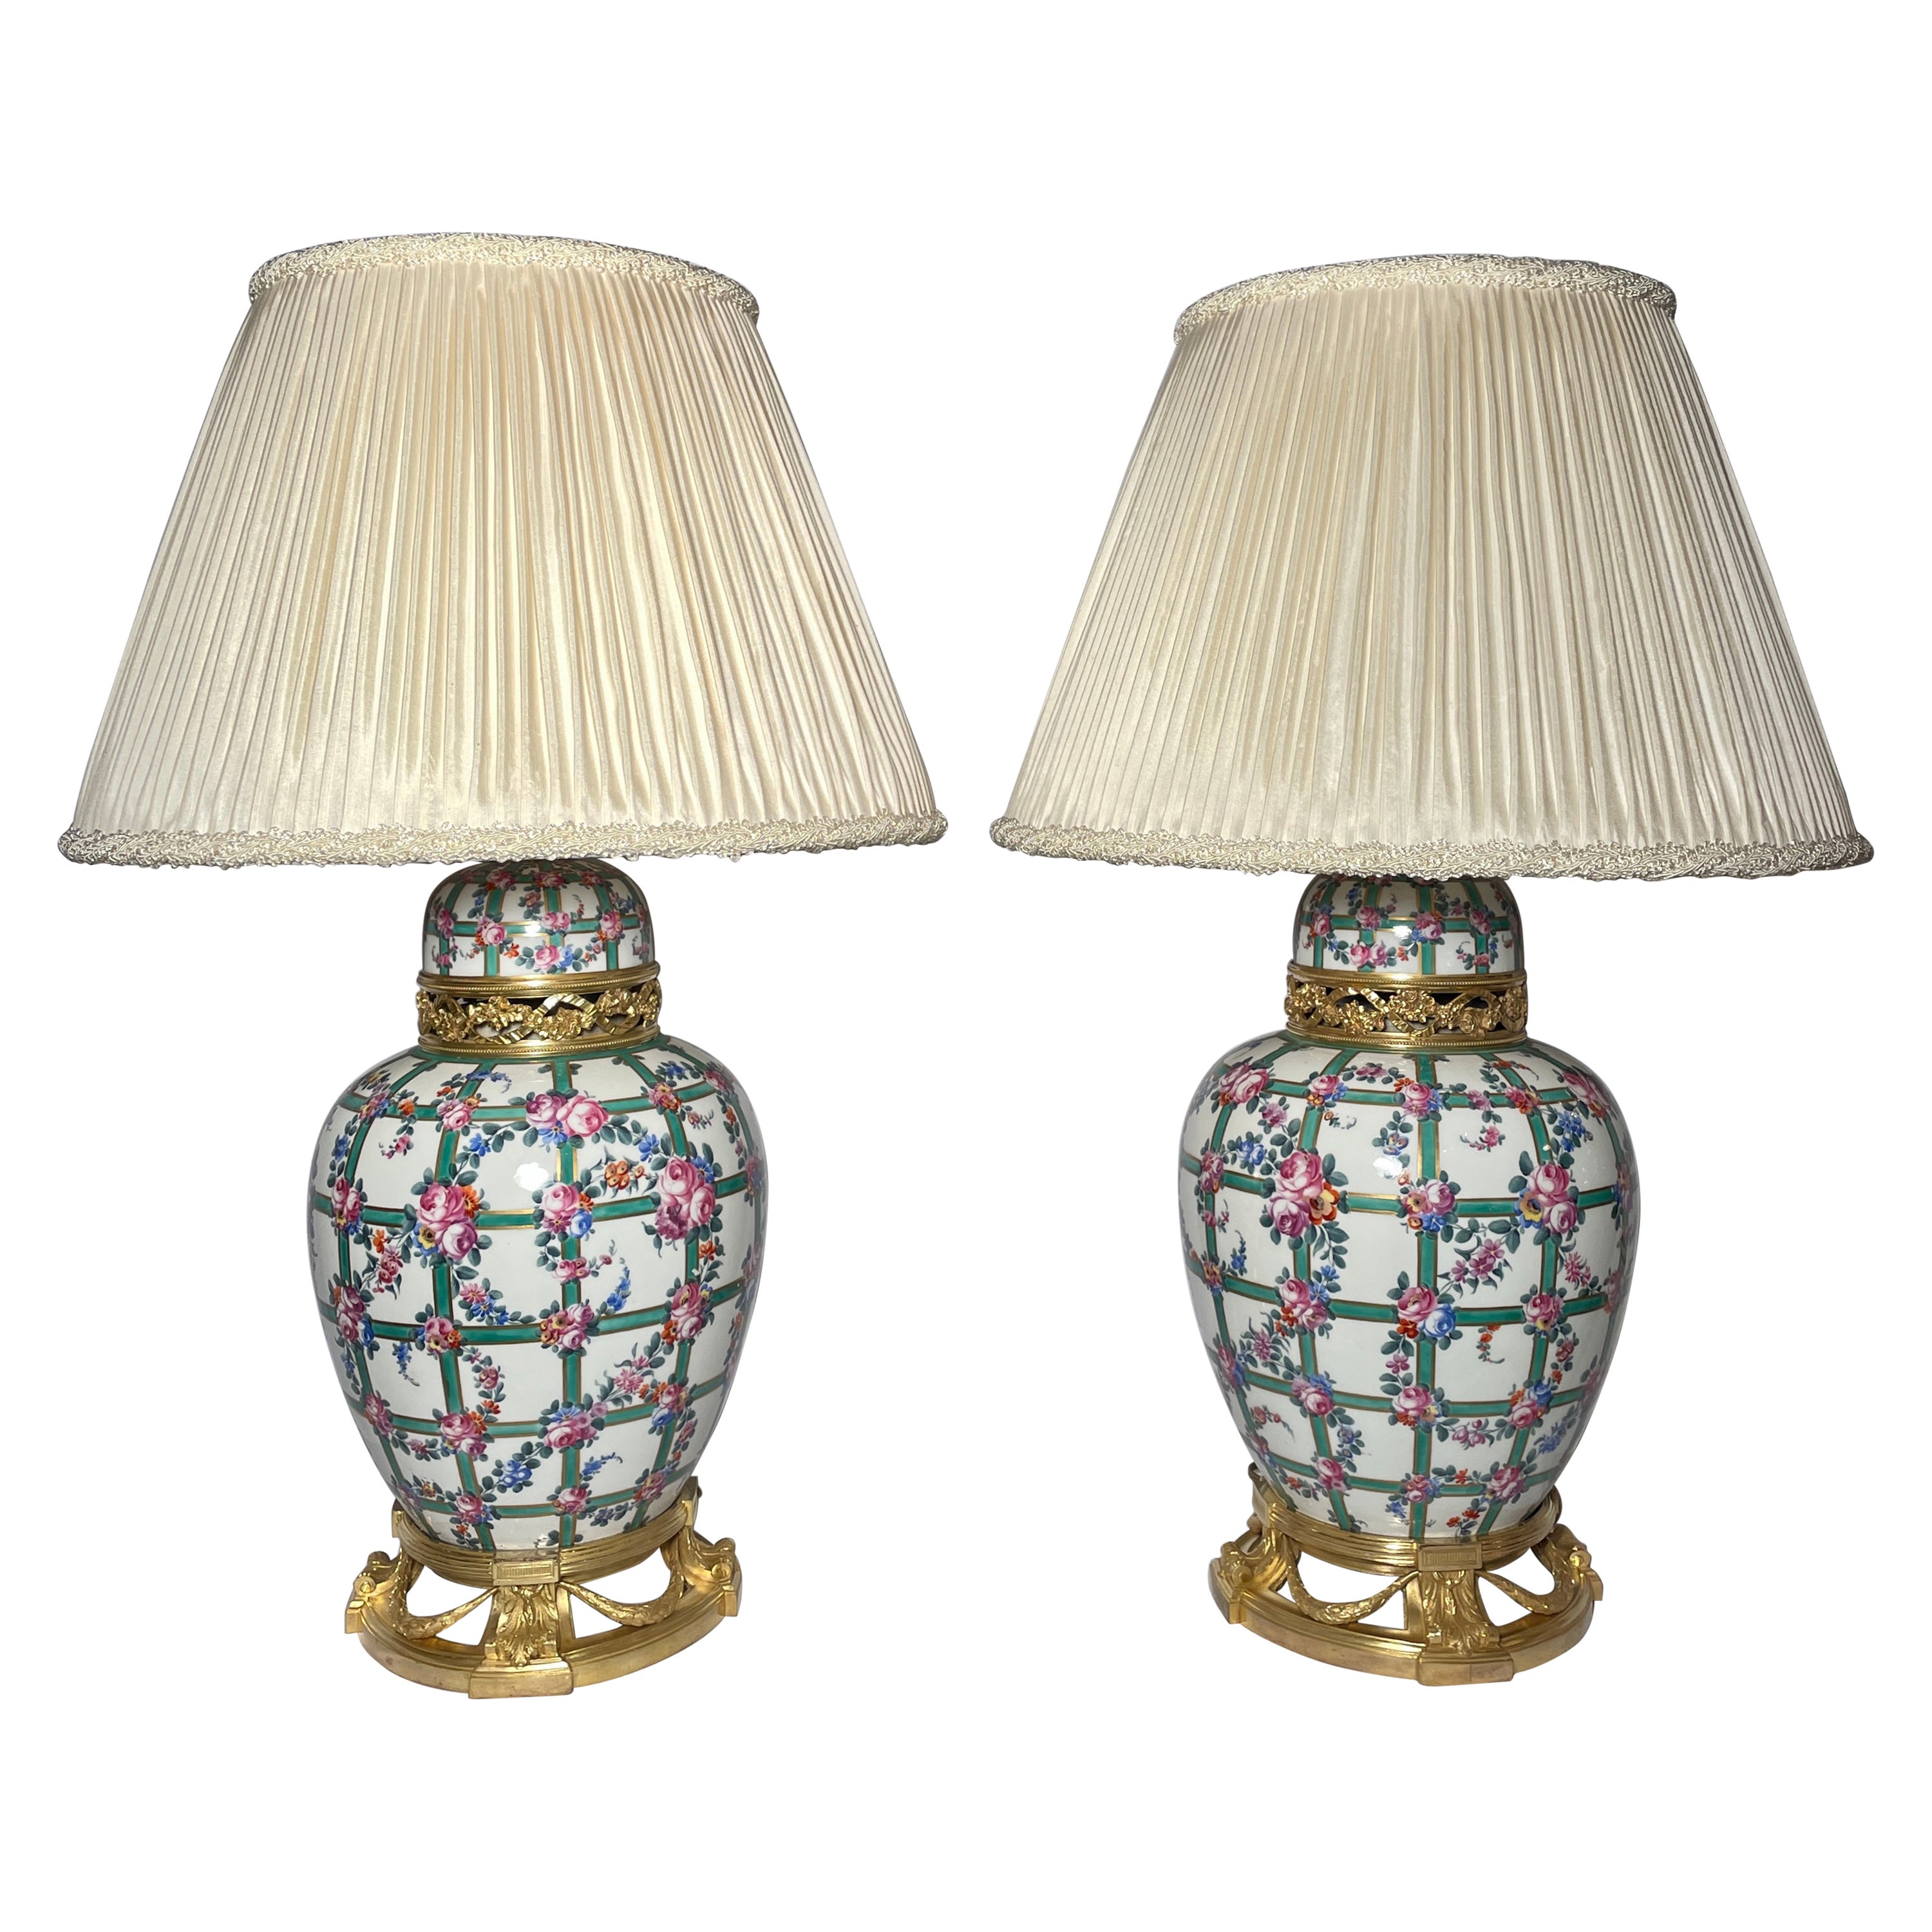 Pair Antique French Belle Epoque Porcelain and Ormolu Lamps, circa 1880 For Sale